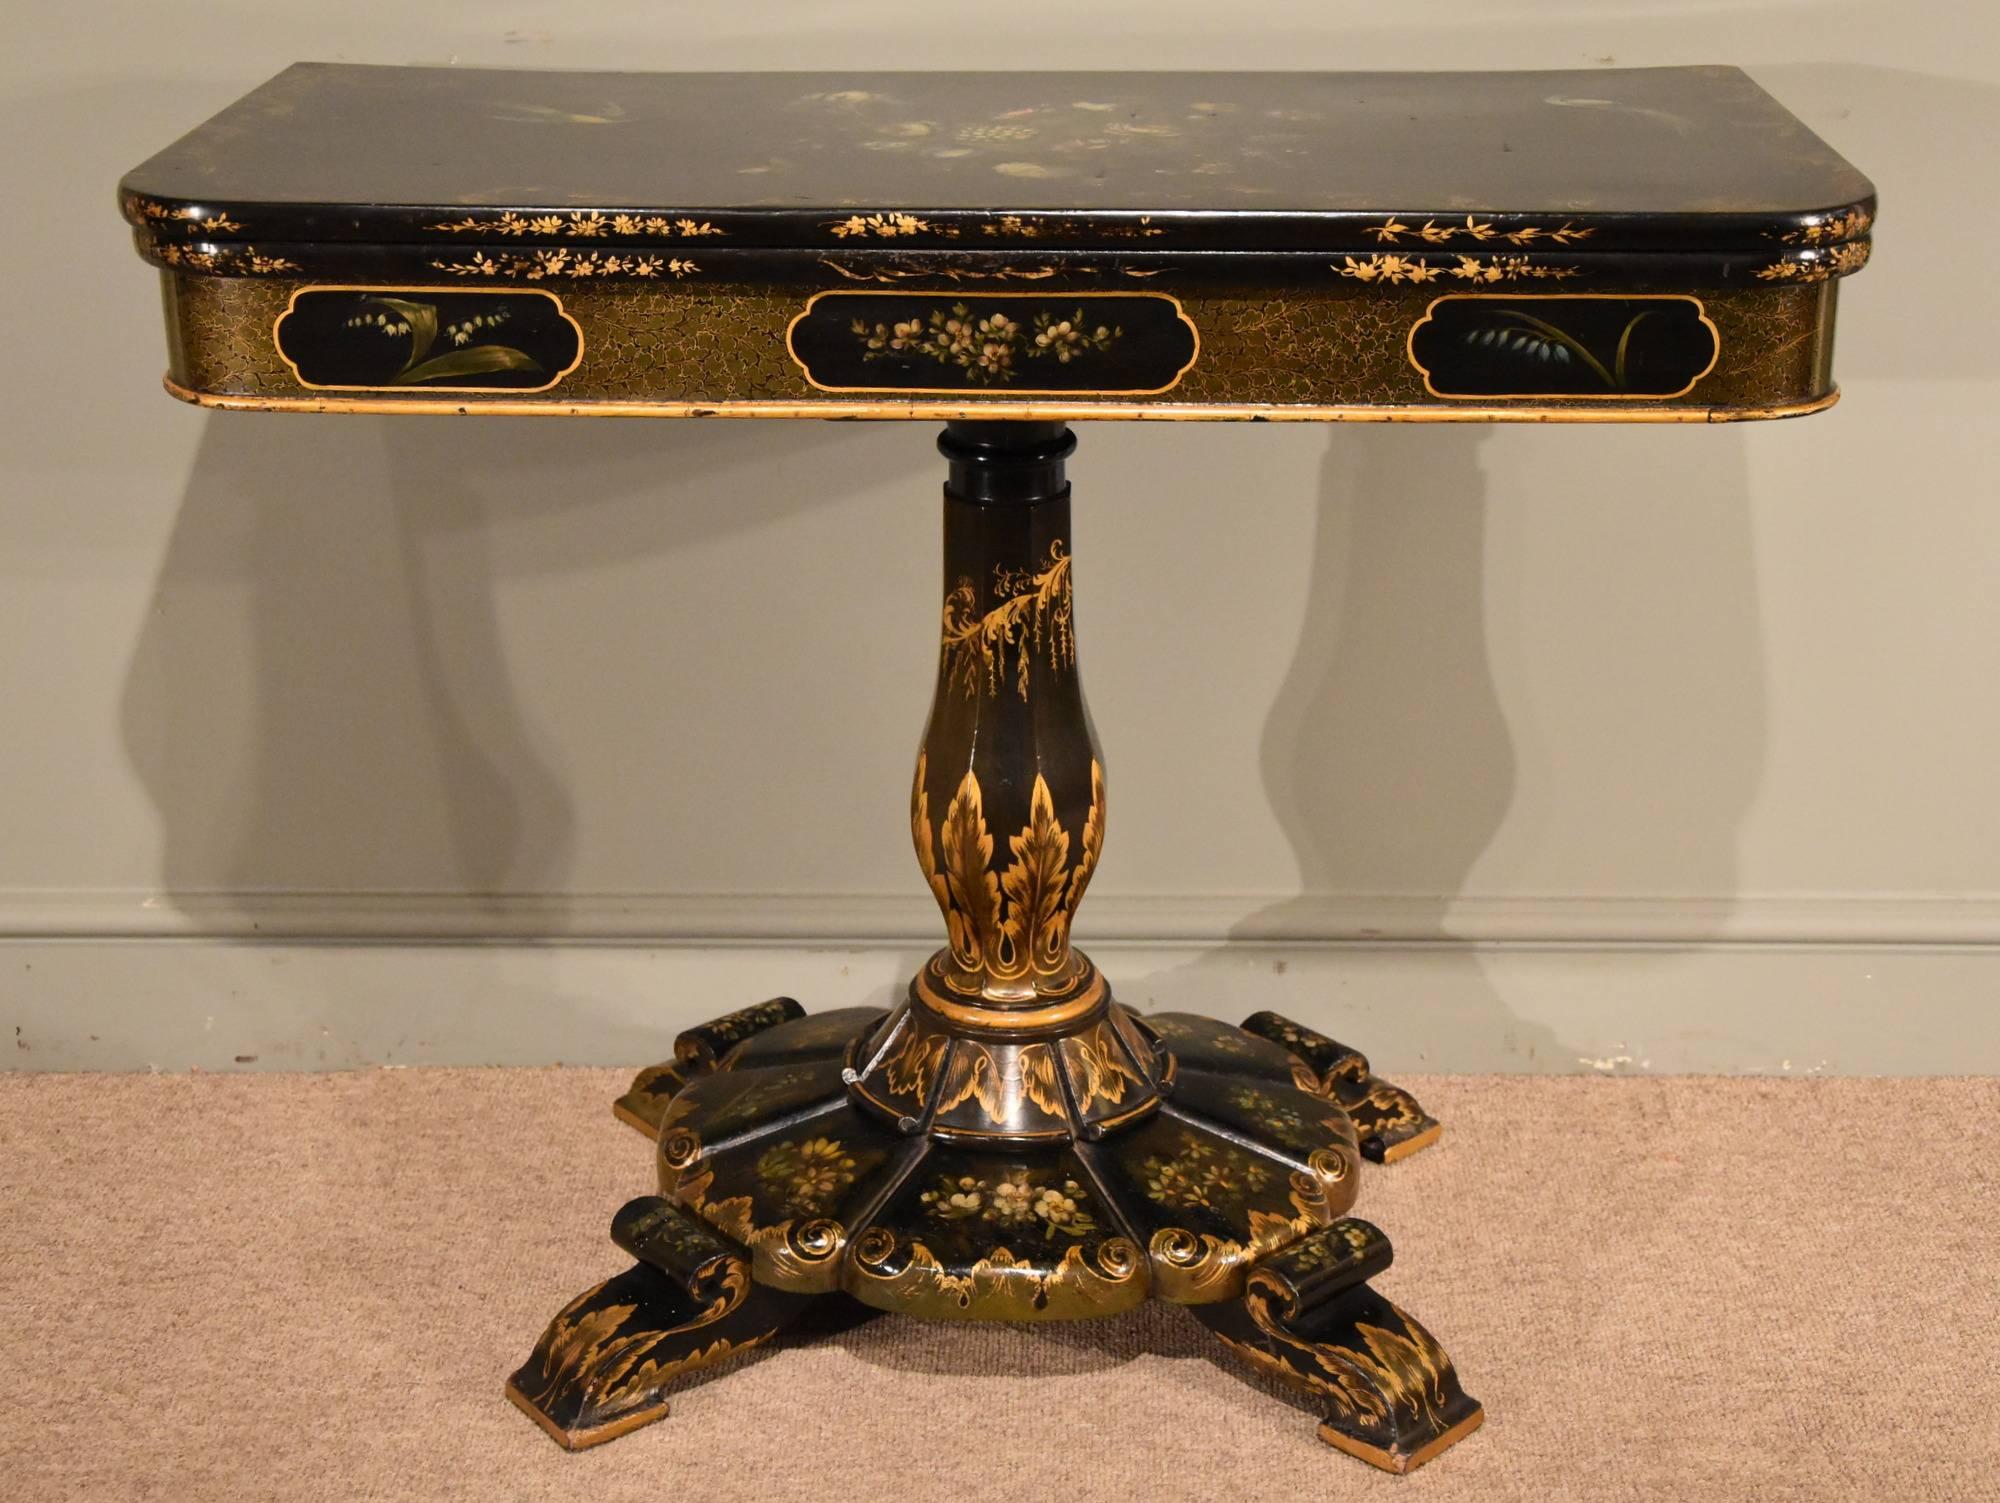 A superb William IV Japanned card table decorated with exotic birds and flowers. Probably made by a top cabinet workshop with specialist painters and gilders. The top is centred by a bouquet of blooms flanked by two birds of paradise the frieze has